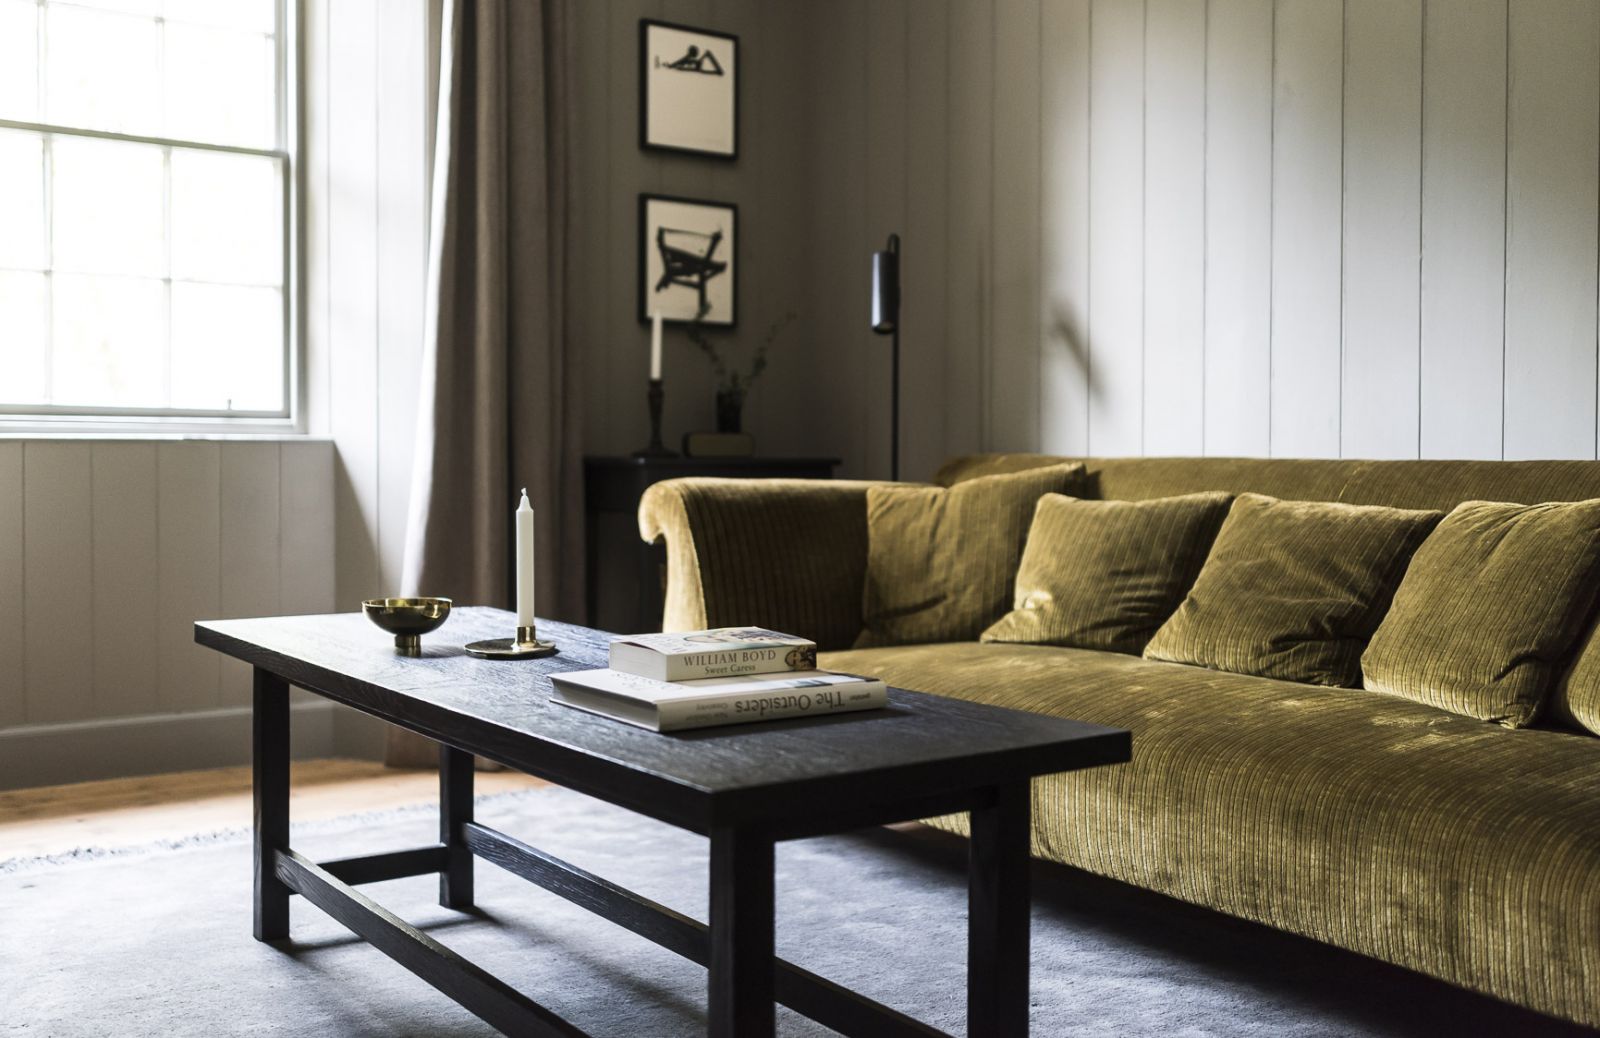 Kinloch Boutique Guesthouse & Lodge in Sutherland - modern scandi interiors of the new rental in the Scottish Highlands 